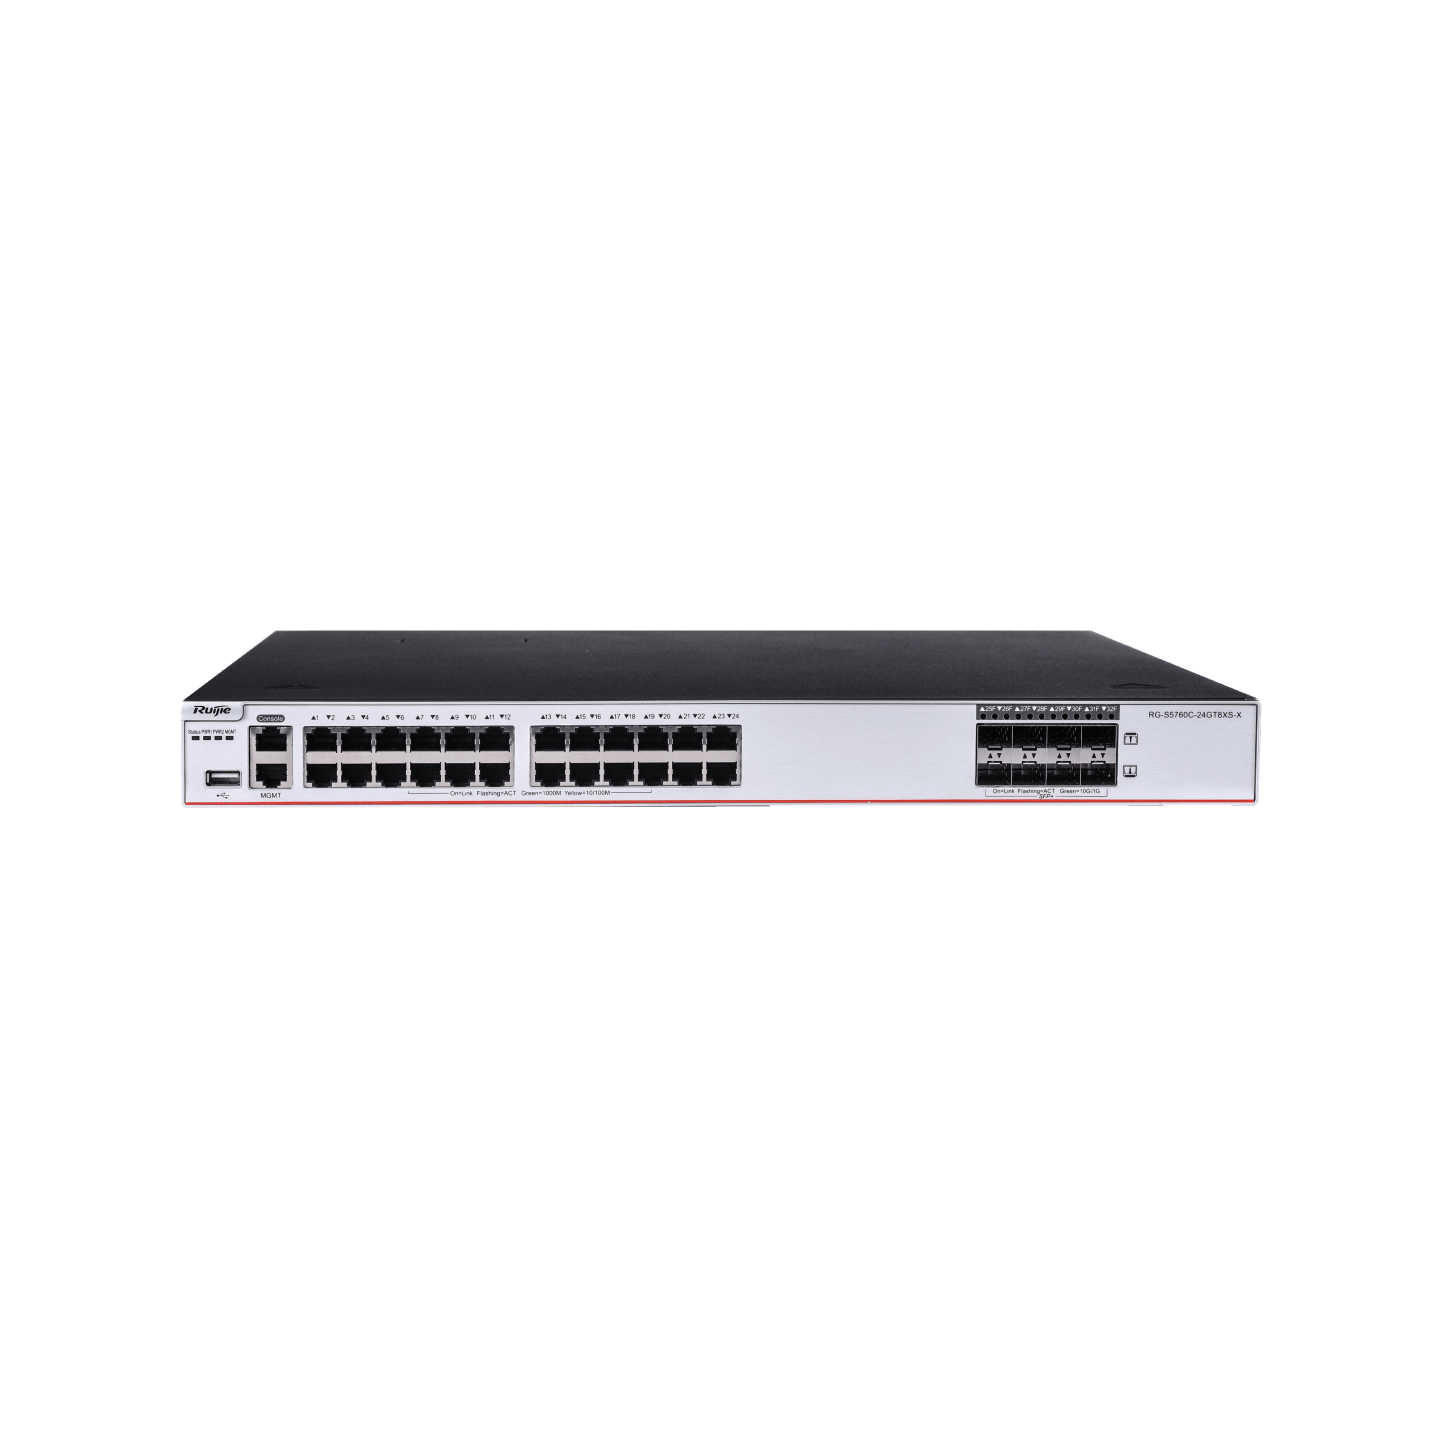 RG-S5760C-24GT8XS-X 24-Port GE Electrical Layer 3 Enterprise-Class Core or Aggregation Switch, Eight 10G Uplink Ports